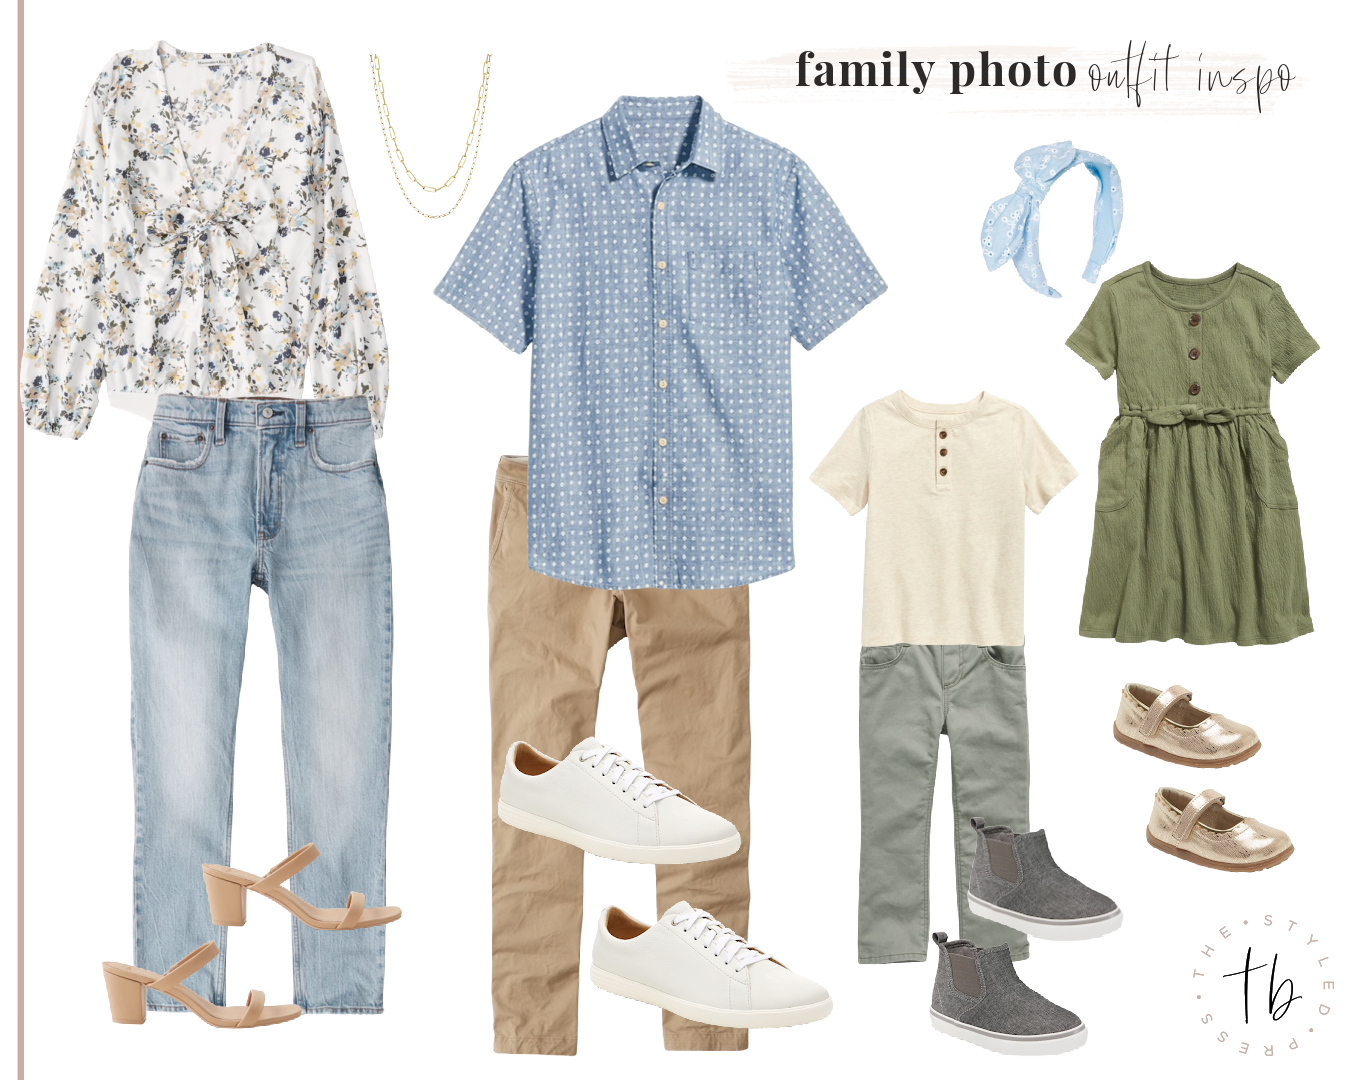 spring family photo outfit ideas, spring outfits 2021, family photo outfit inspo, family photos outfit inspiration